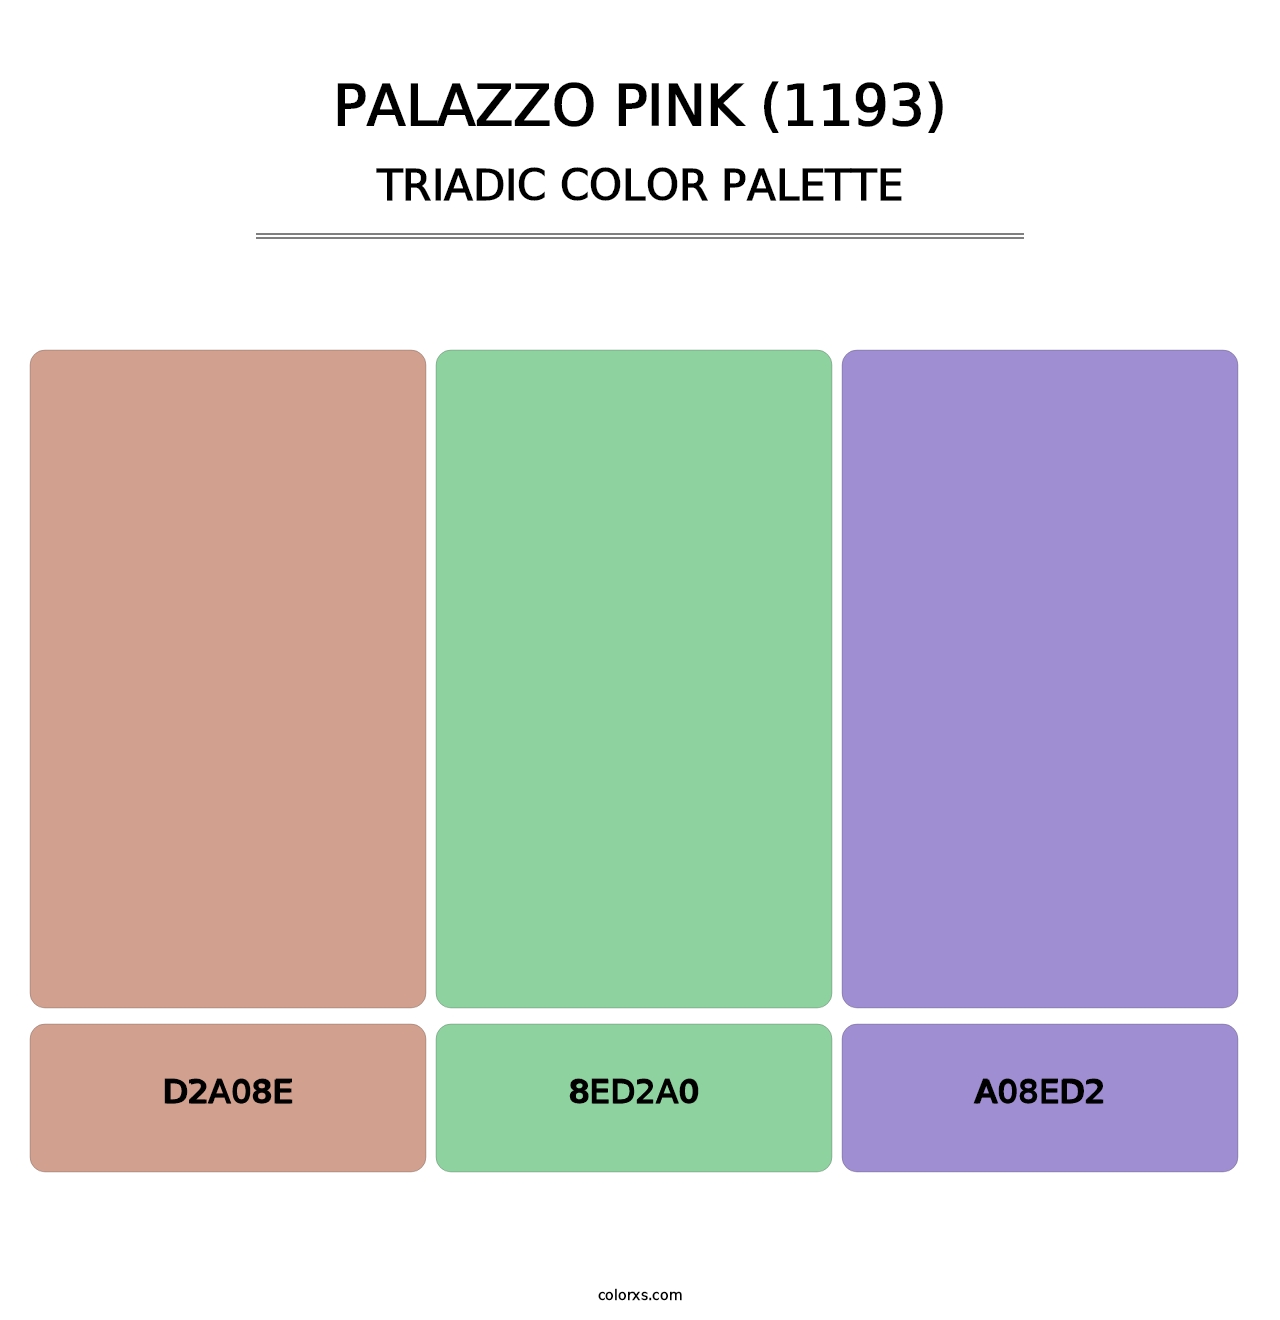 Palazzo Pink (1193) - Triadic Color Palette